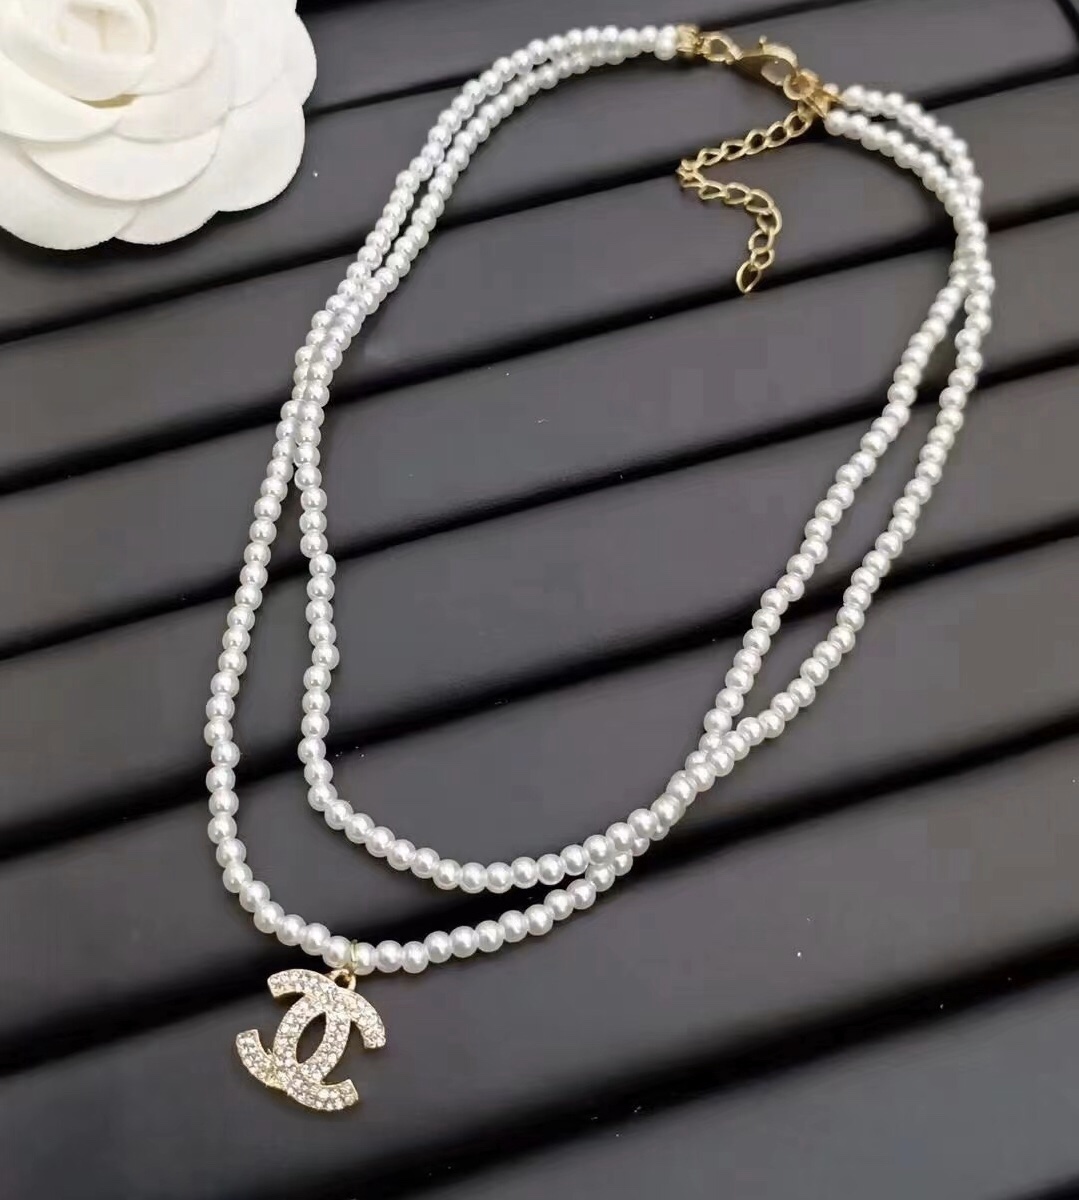 Chanel pearls necklace 113821